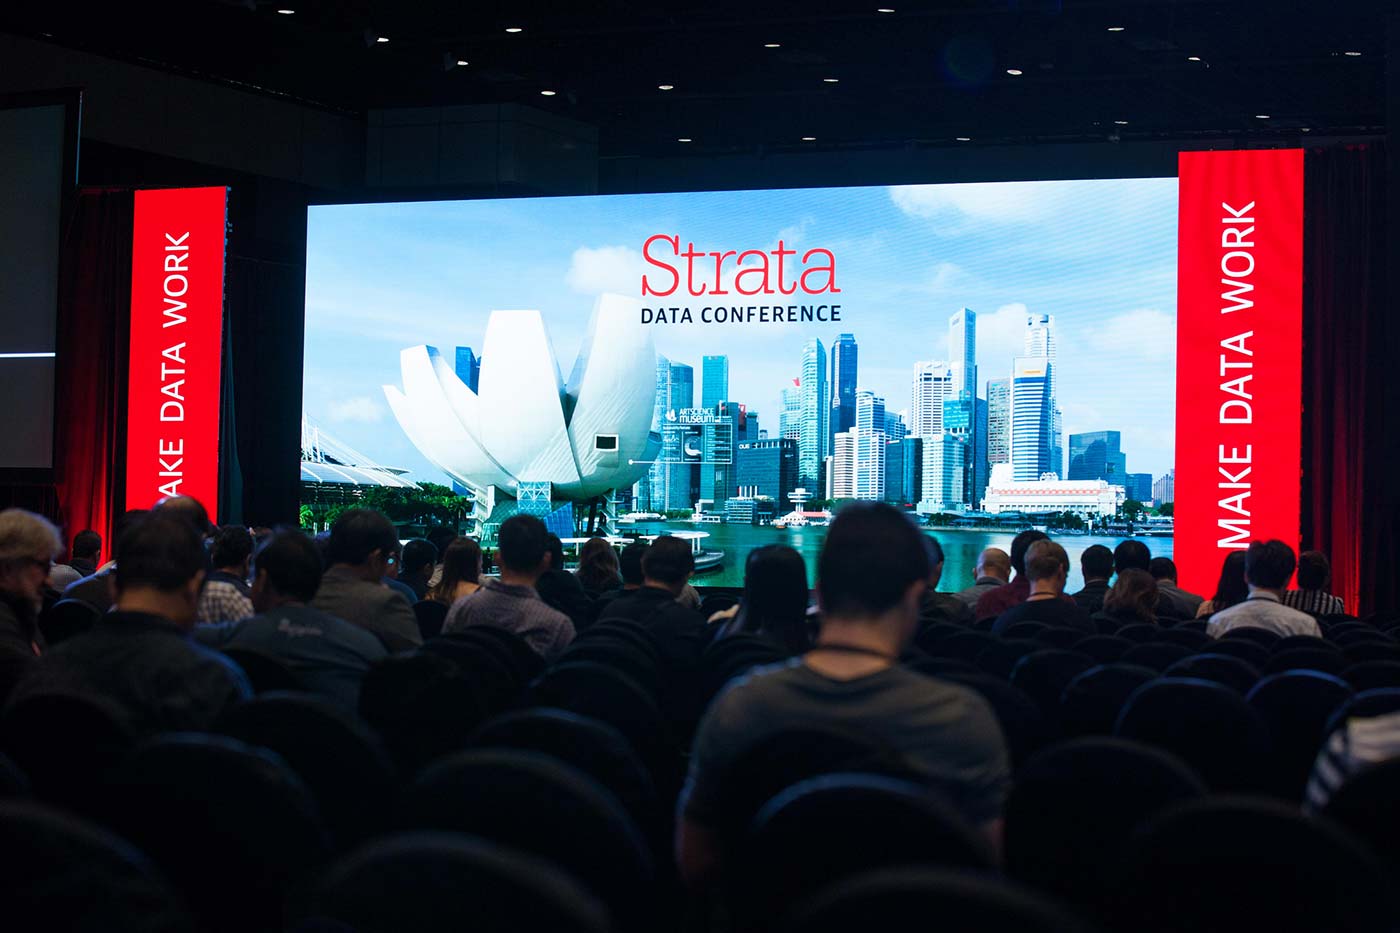 Keynote stage at Strata Data Conference in Singapore